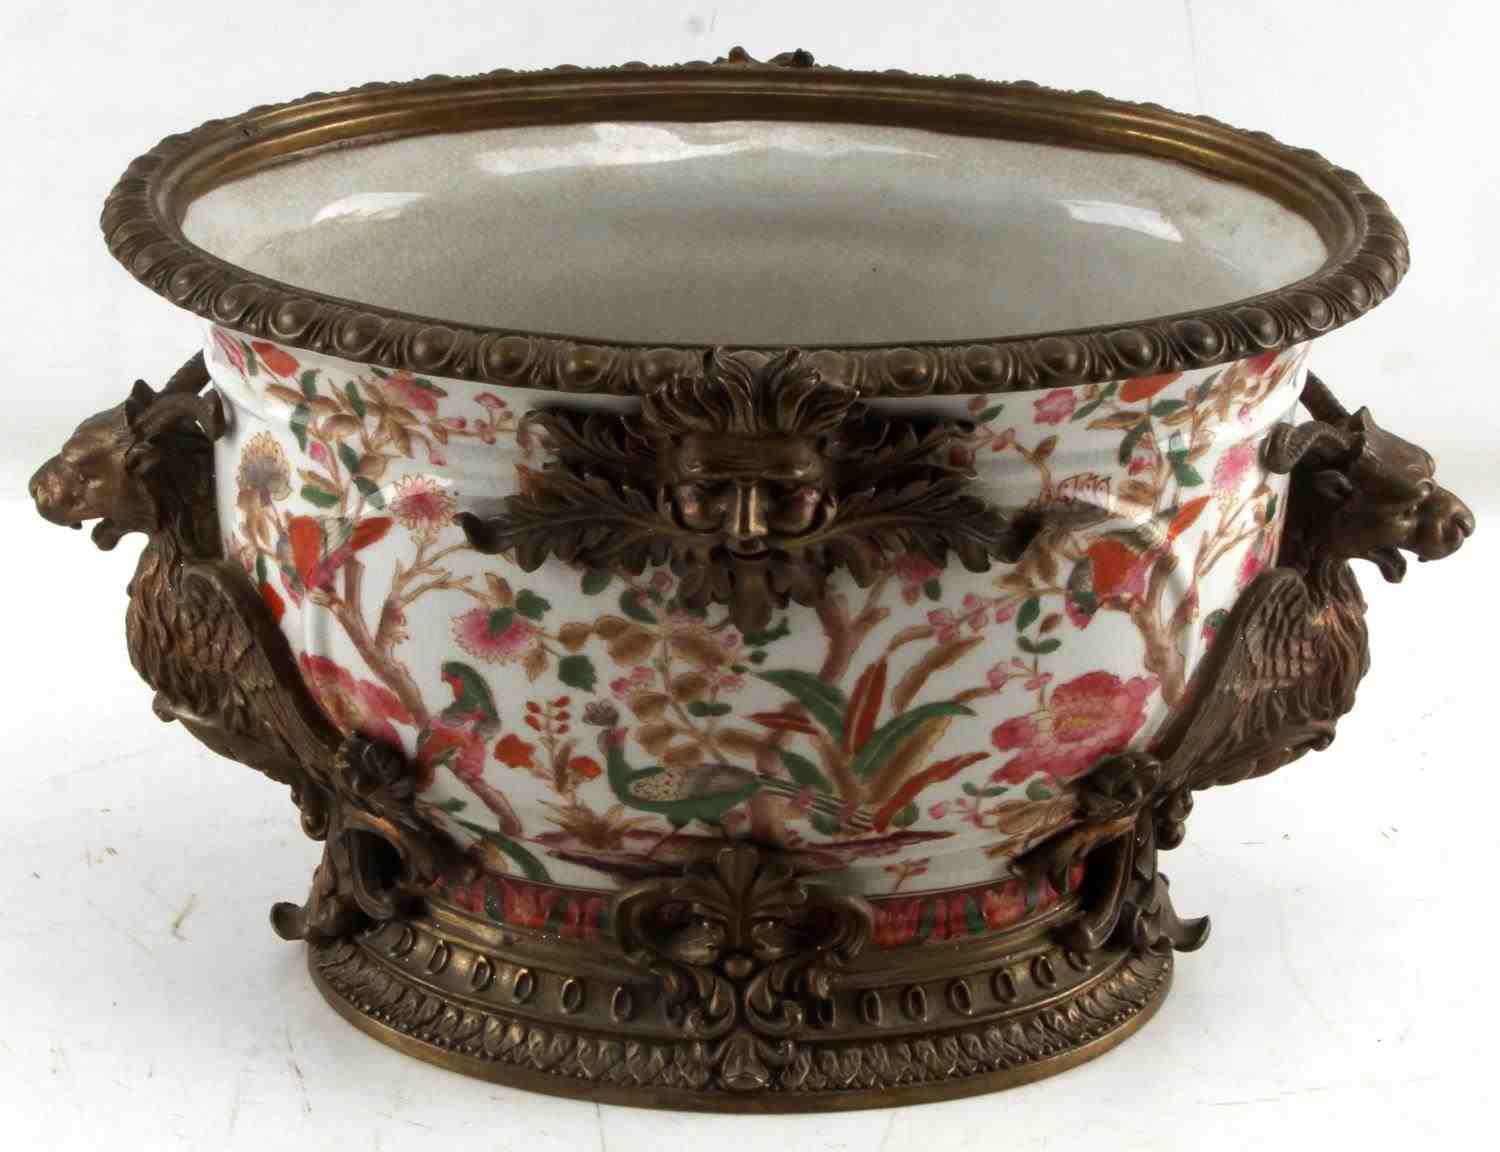 ANTIQUE PORCELAIN AND BRASS TUREEN